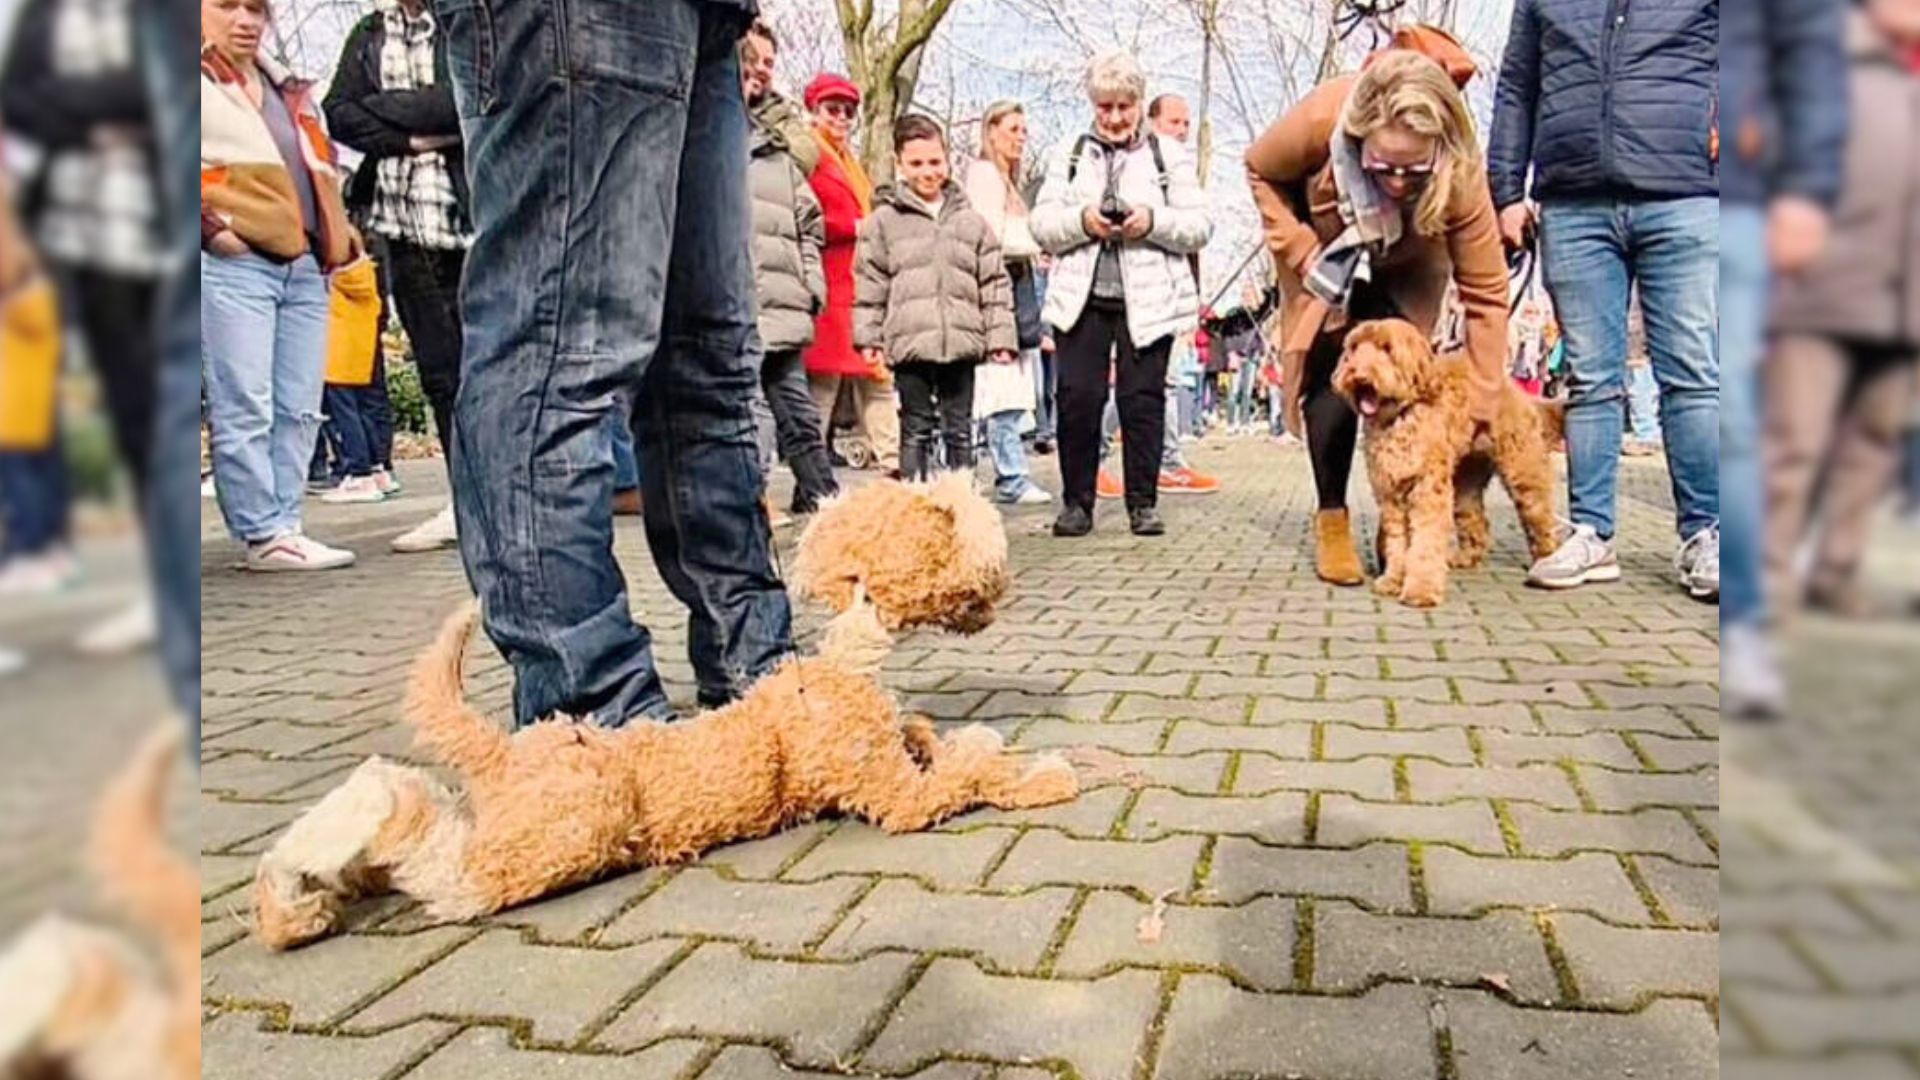 Man Was Walking His Dog In The Park When He Noticed A Person With A Very Strange ‘Pet’